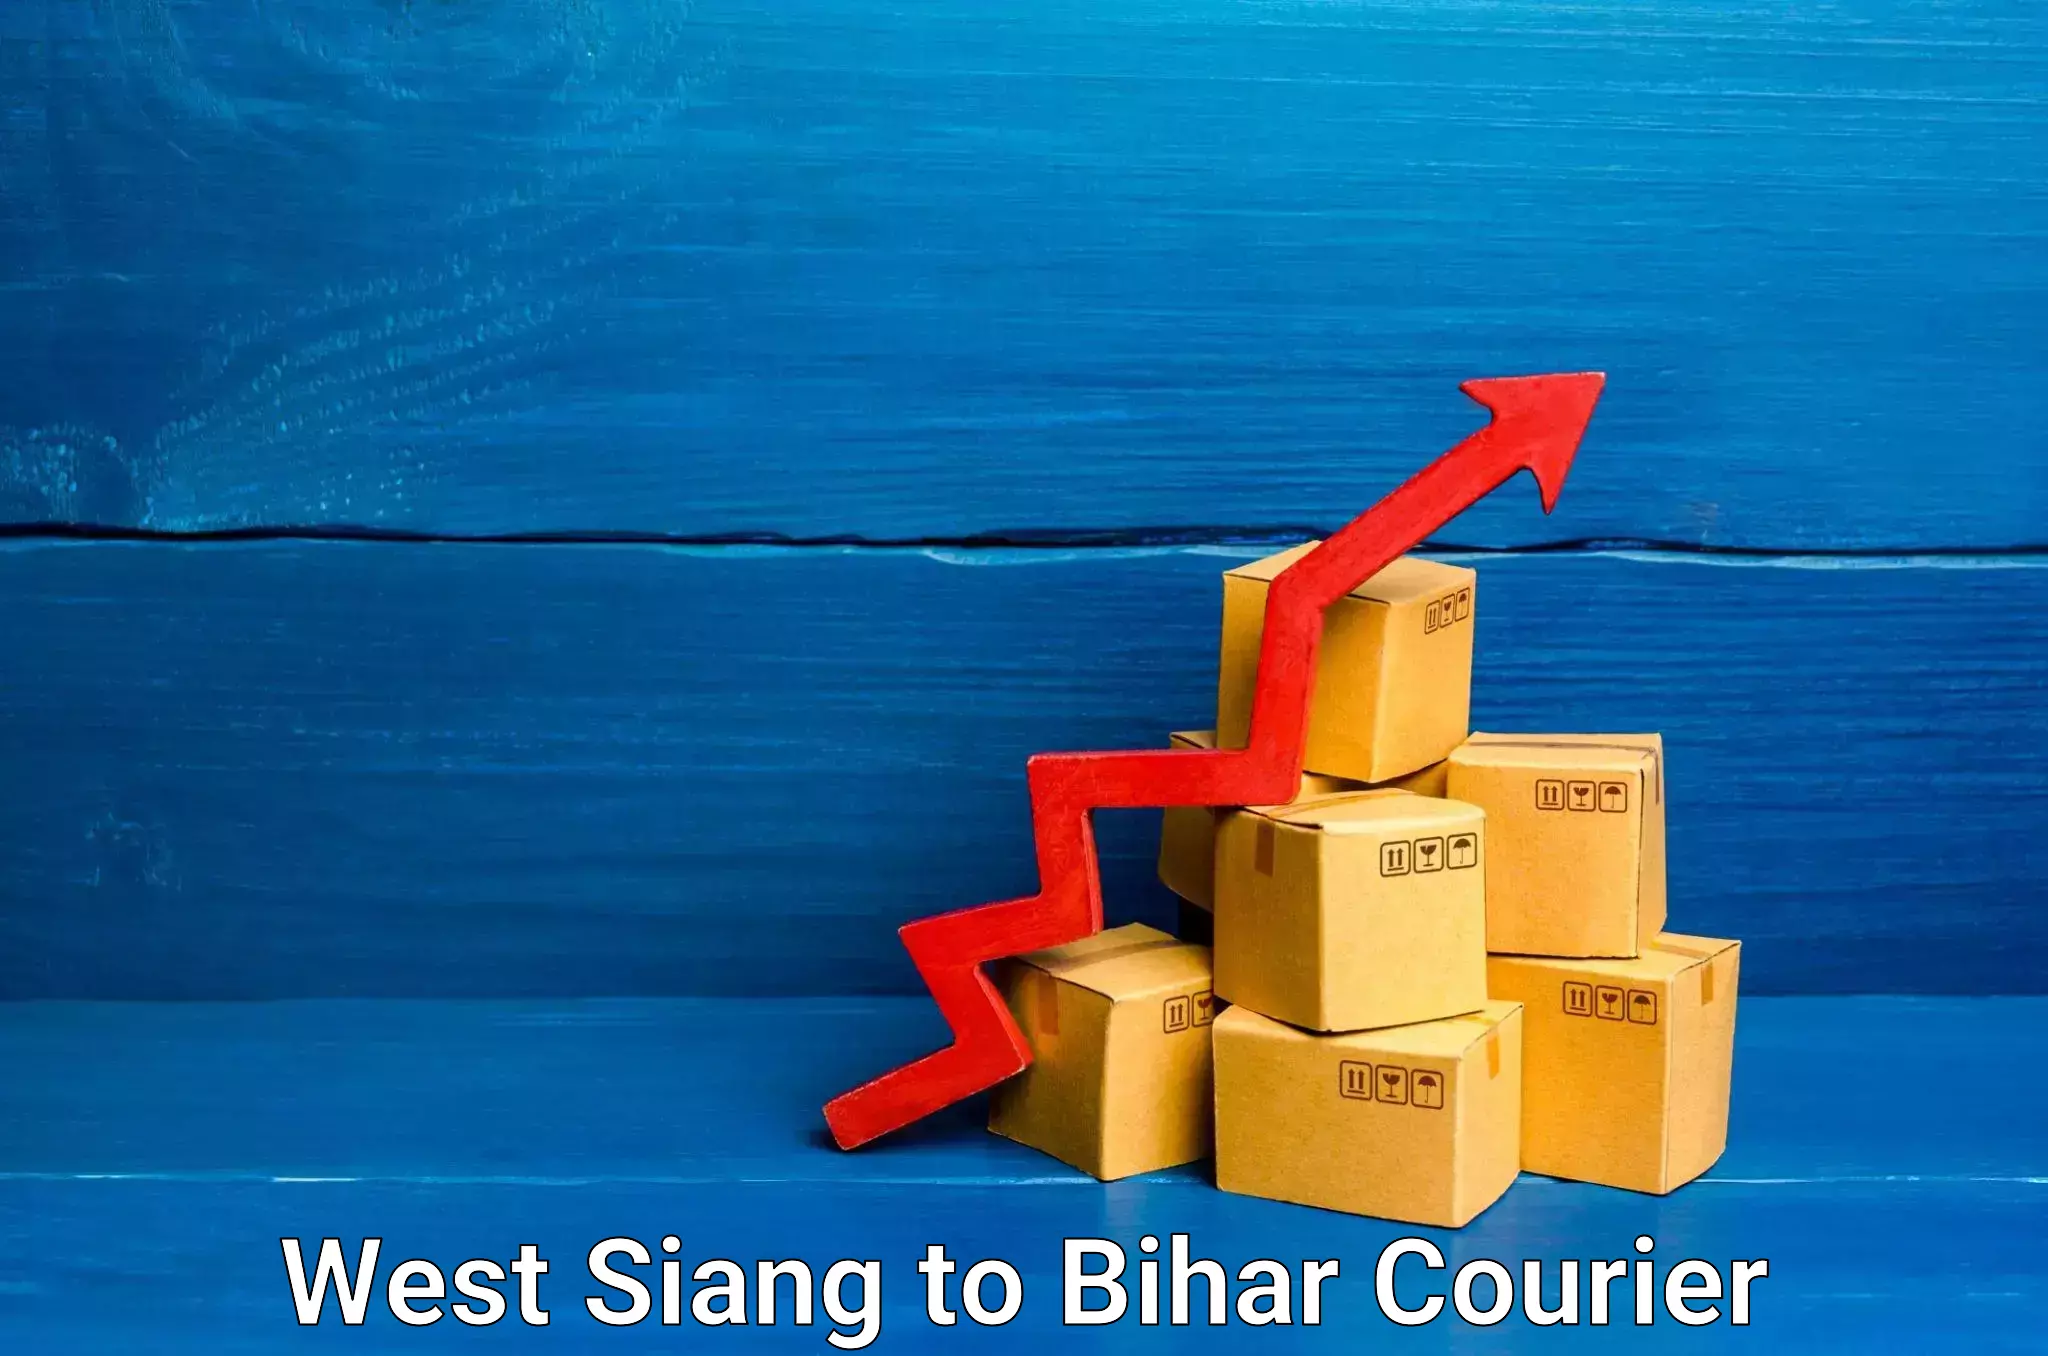 Sustainable delivery practices in West Siang to Bihar